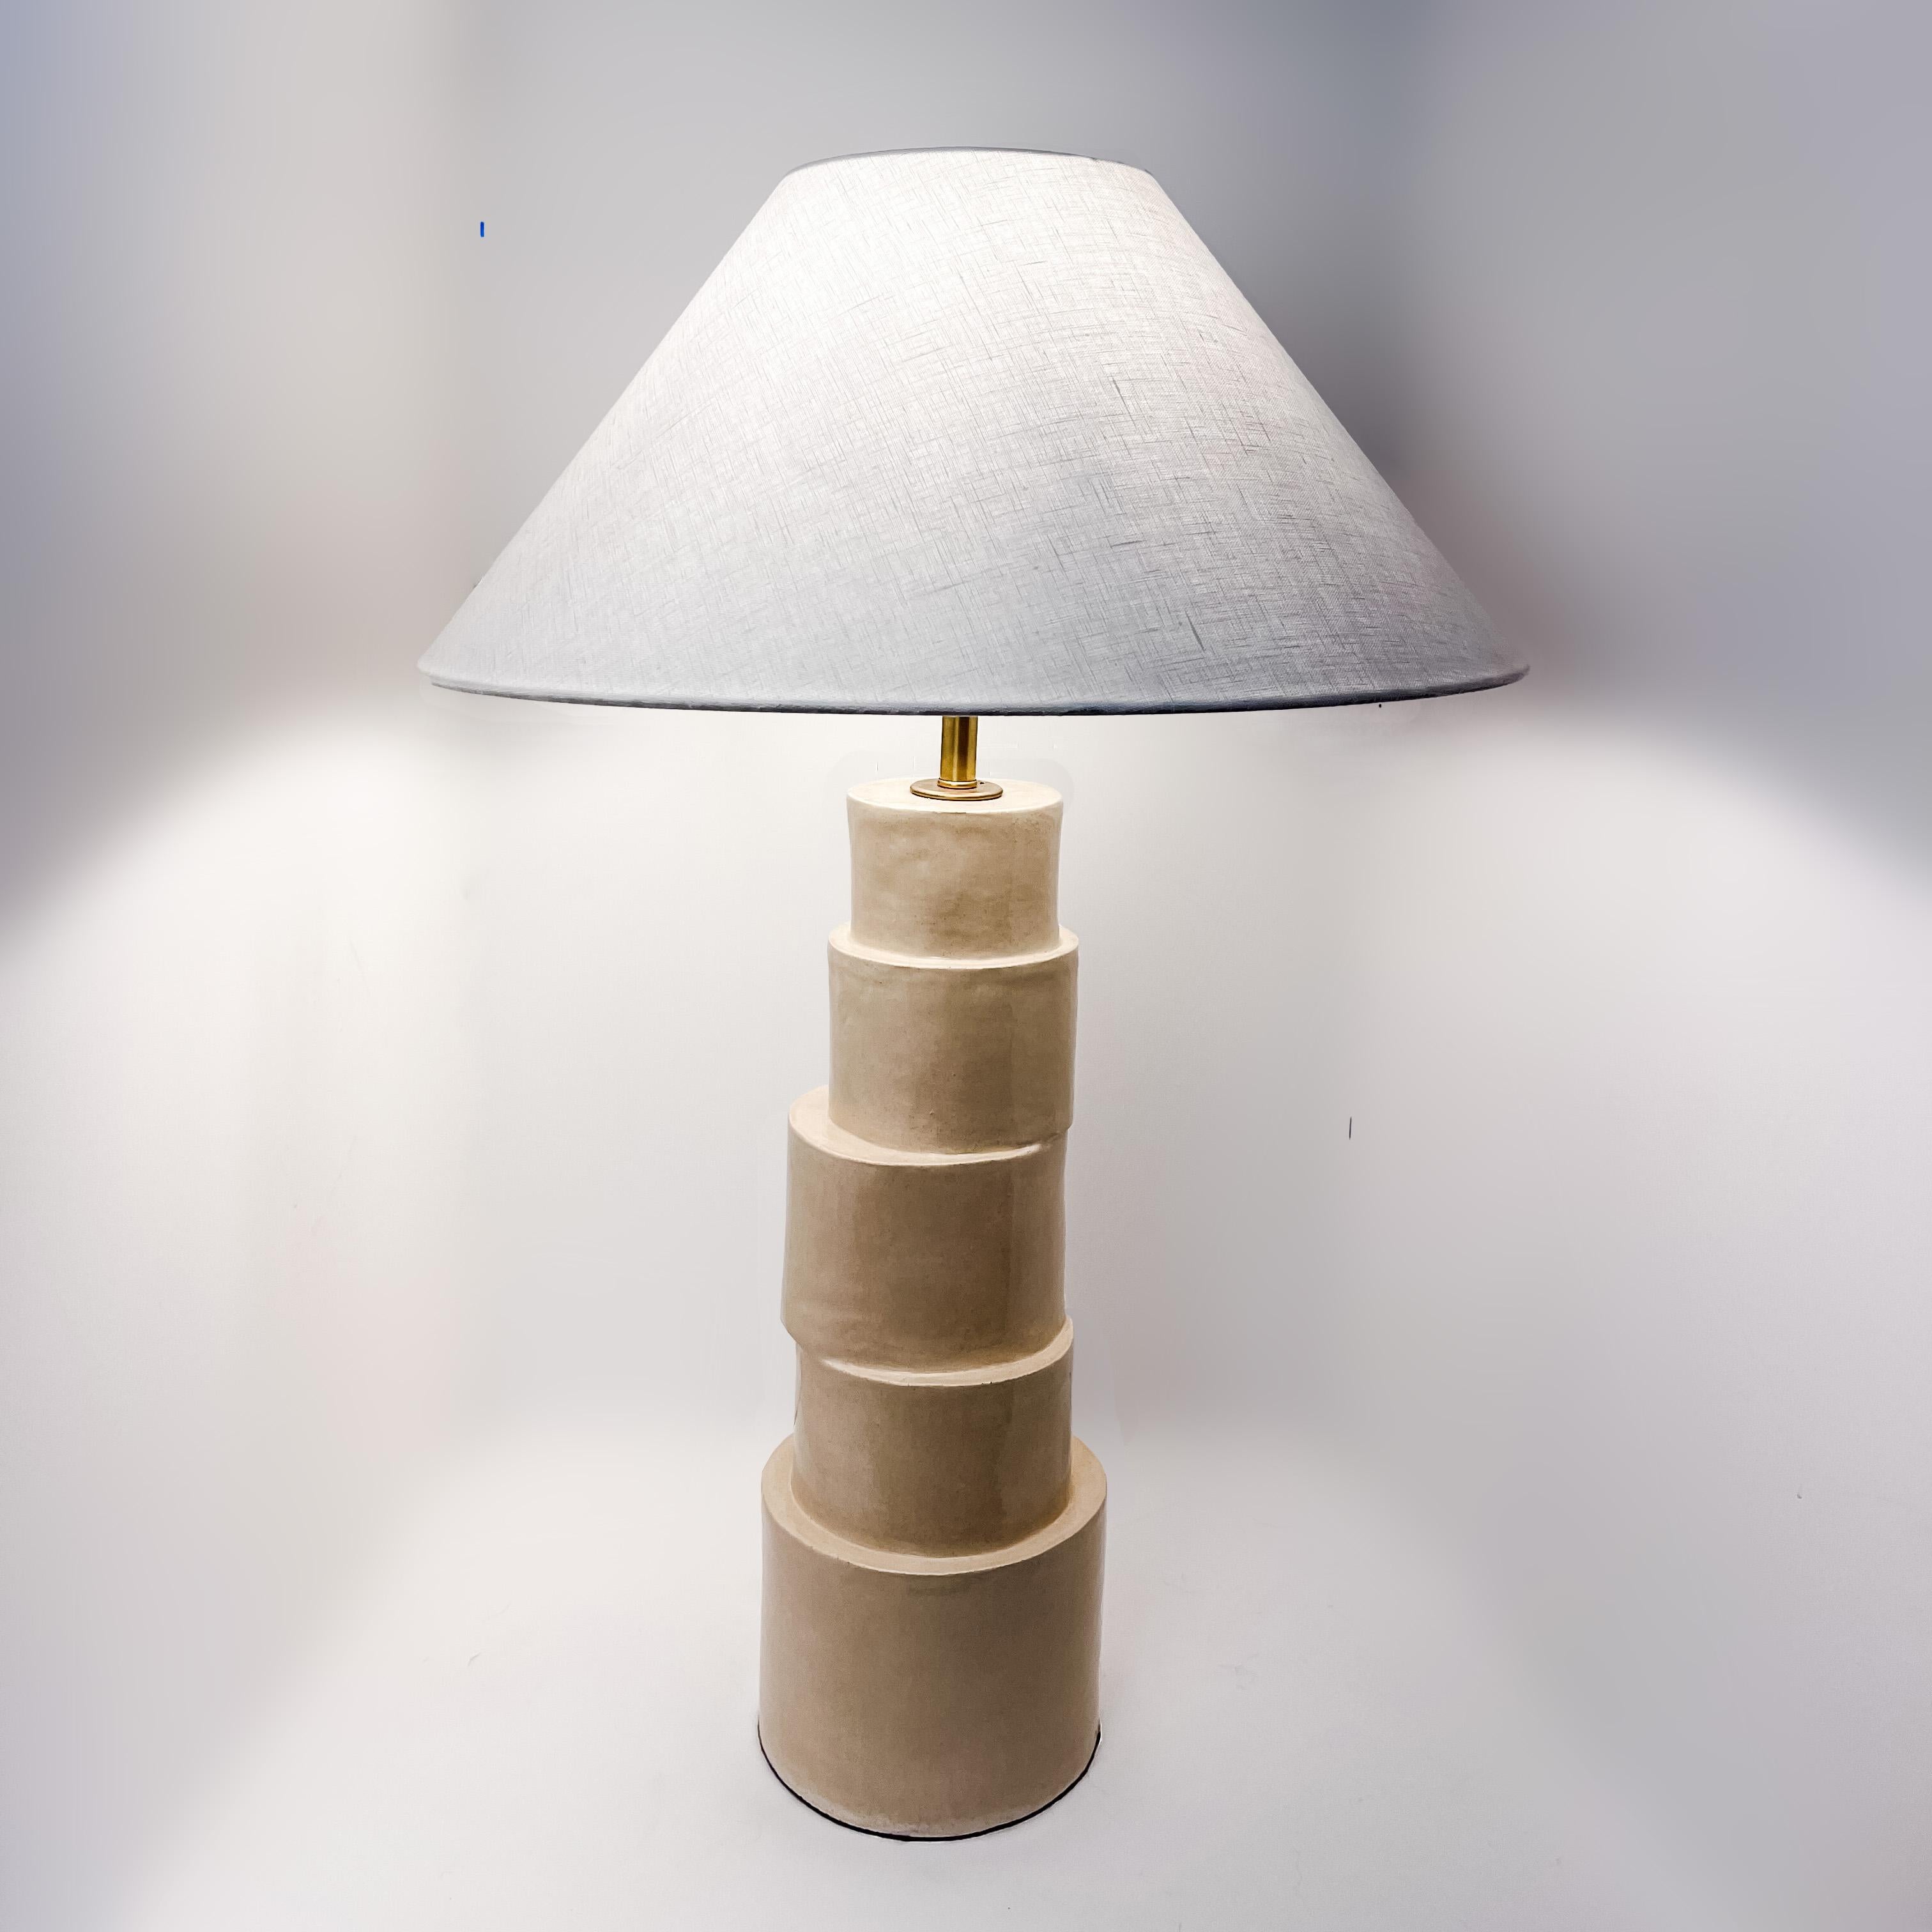 The Stacked Column table lamp is handmade in raku clay in a camel glaze with brass components, braided silver fabric cord, and an ivory linen shade. The repetitive nature, neutral tone, and asymmetrical design will bring interest to any modern or